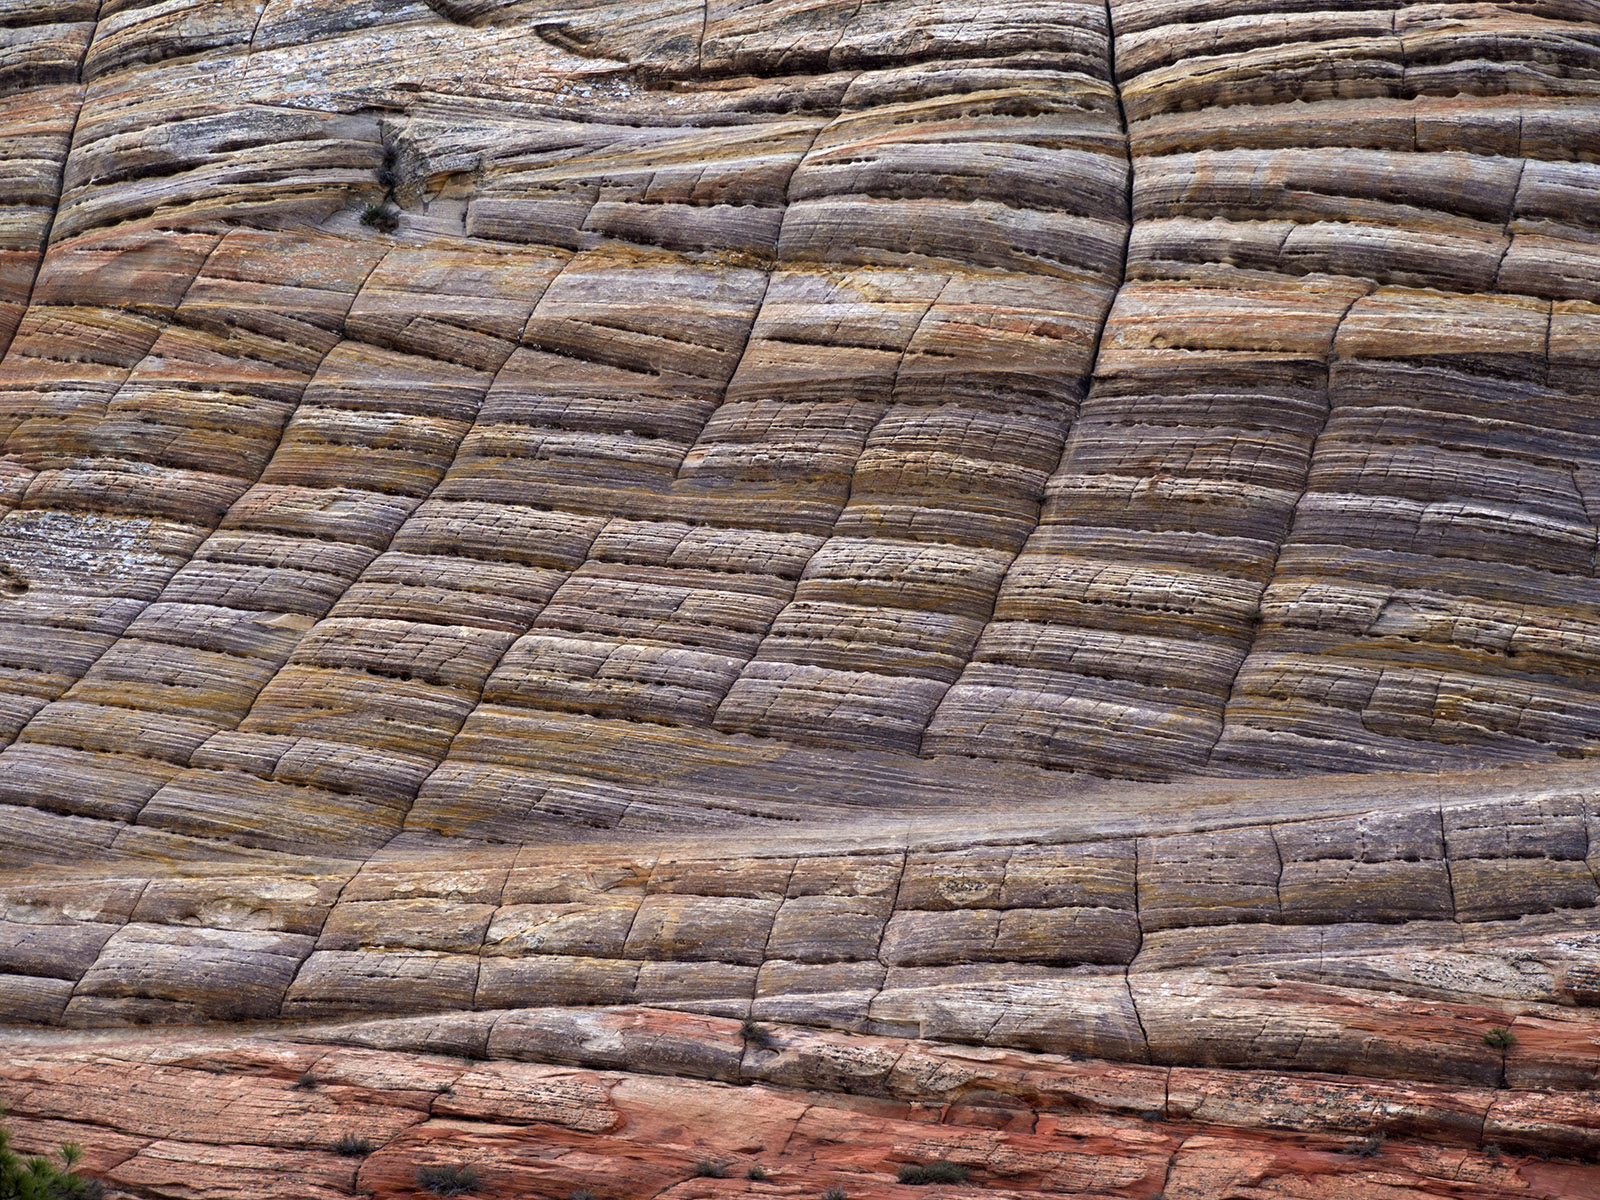 Checkerboard Mesa, detail of crossbedded sandstone layers deposited in the Jurassic Period (200-145 million years ago).